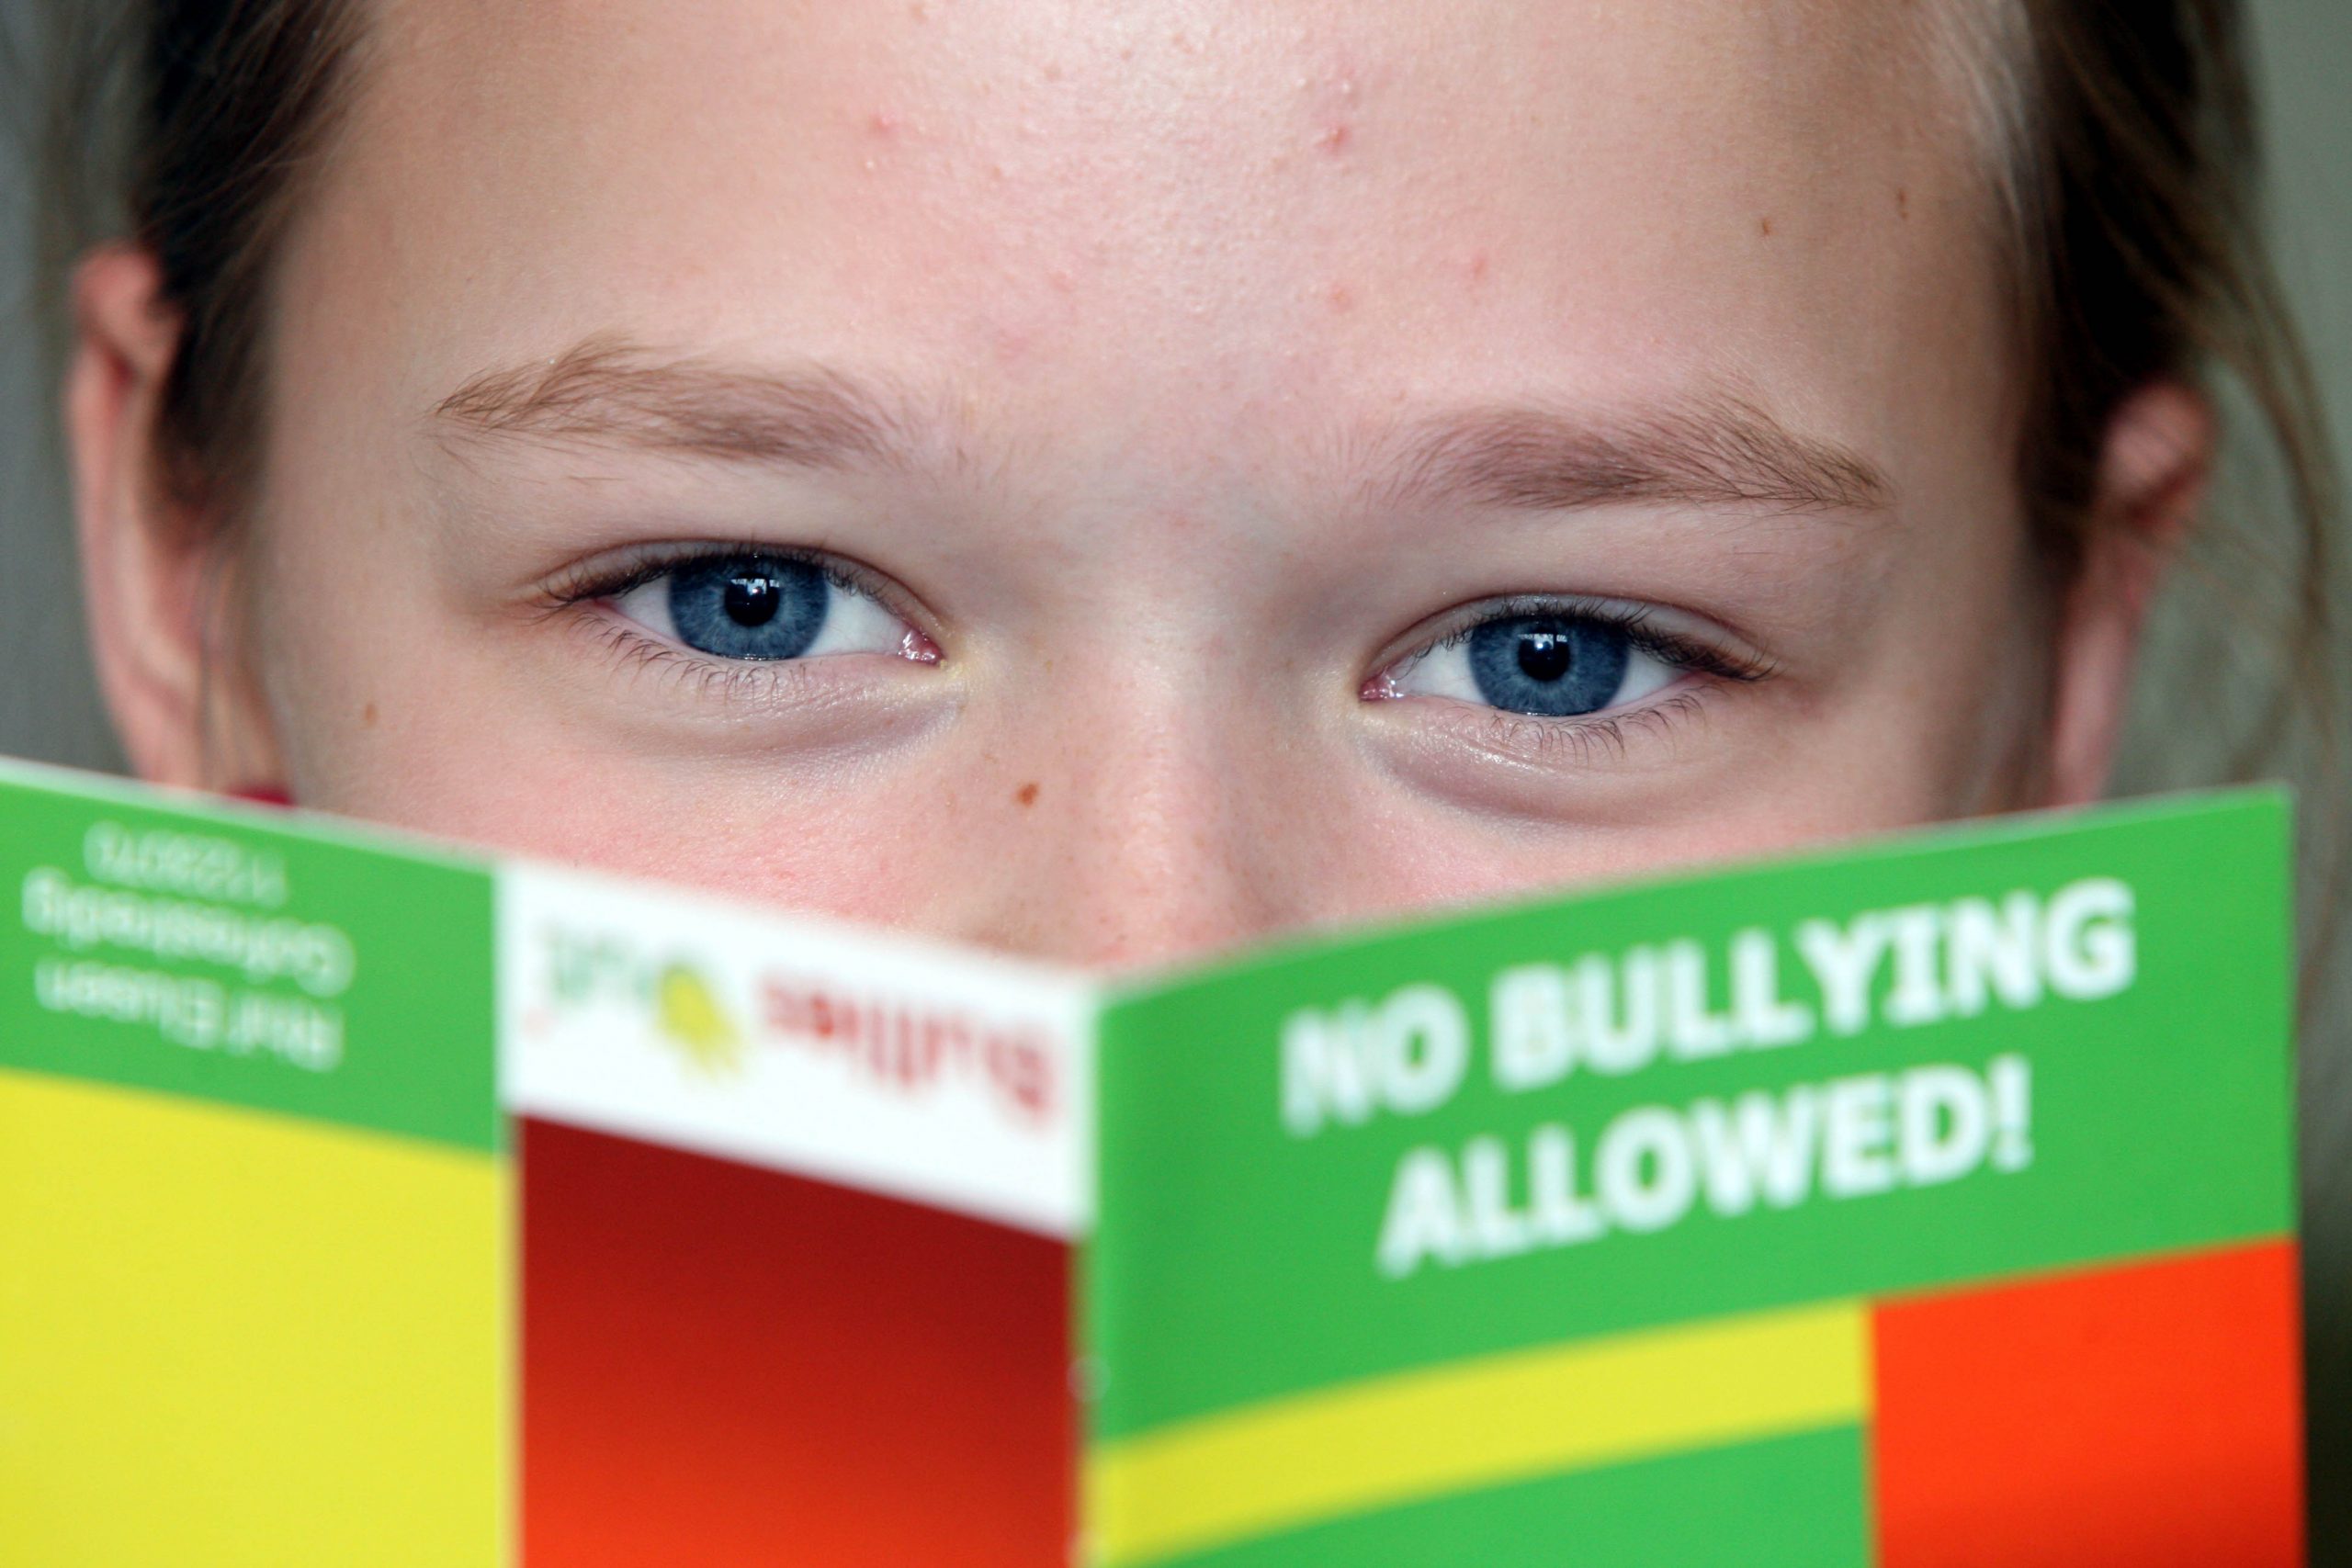 A child looks up from a pamphlet that says "NO BULLYING ALLOWED!"